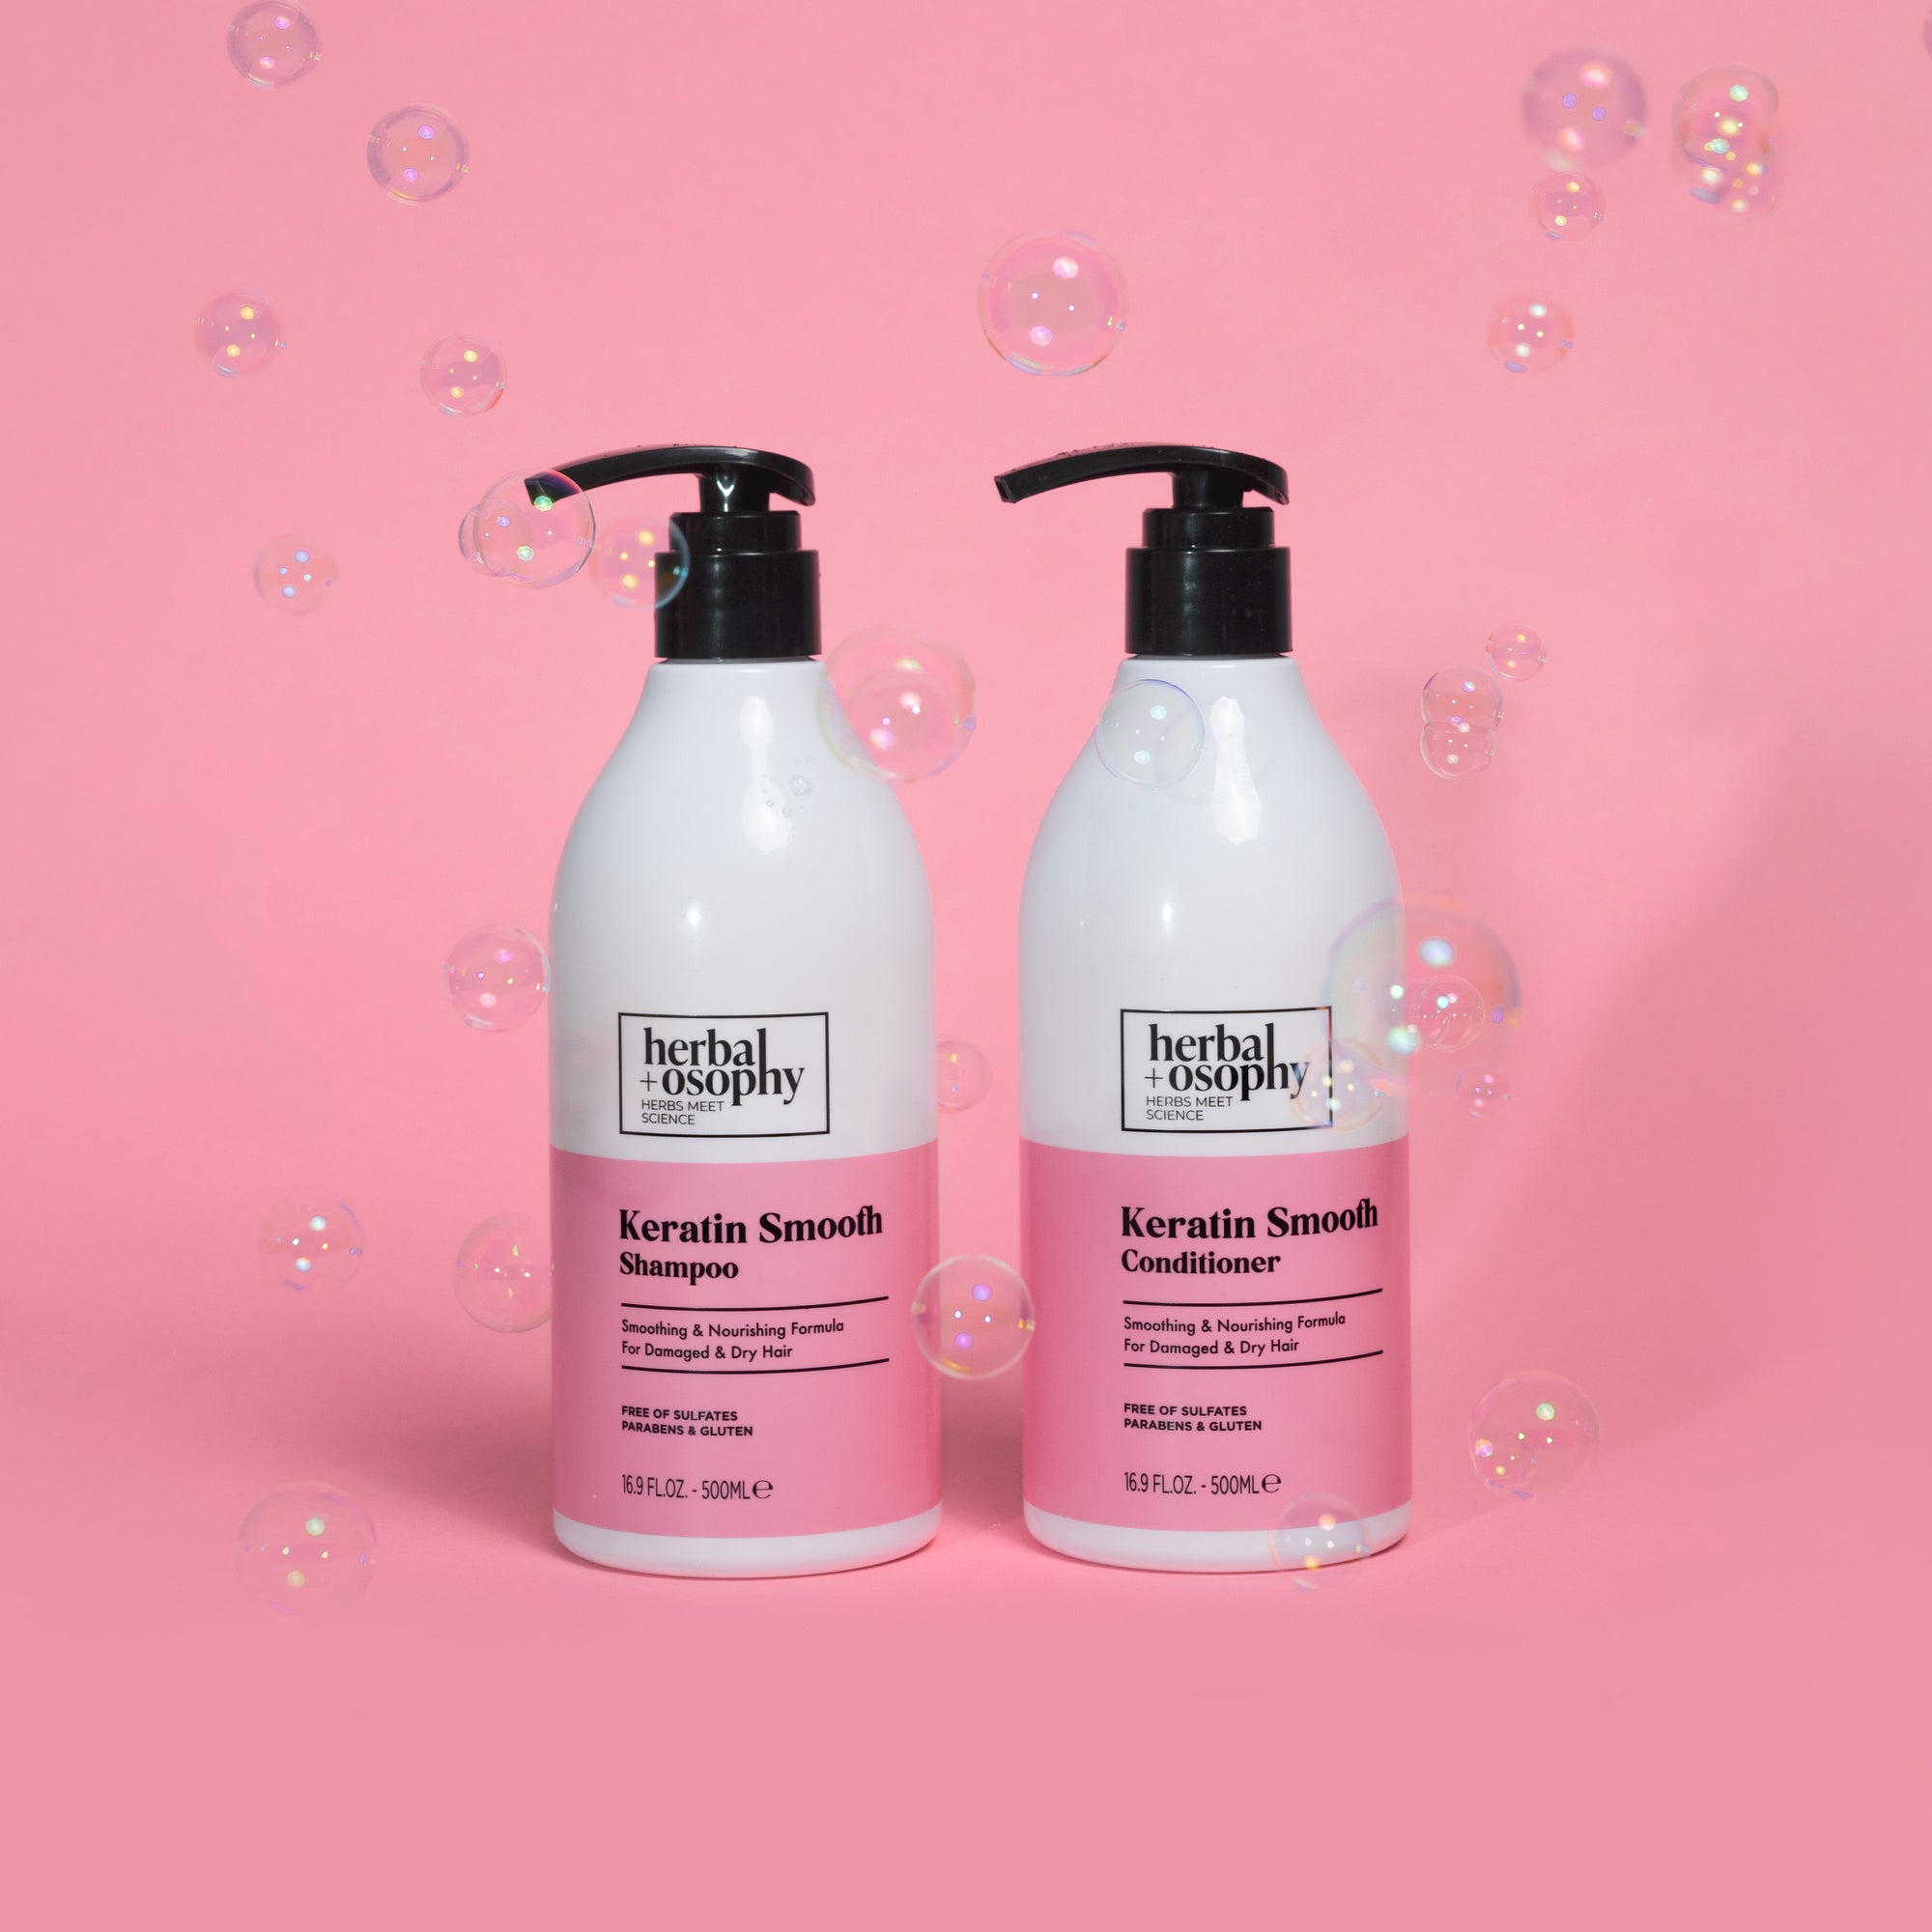 Herbalosophy Keratin Smooth Shampoo and Conditioner bottles on pink backdrop with bubbles floating around them